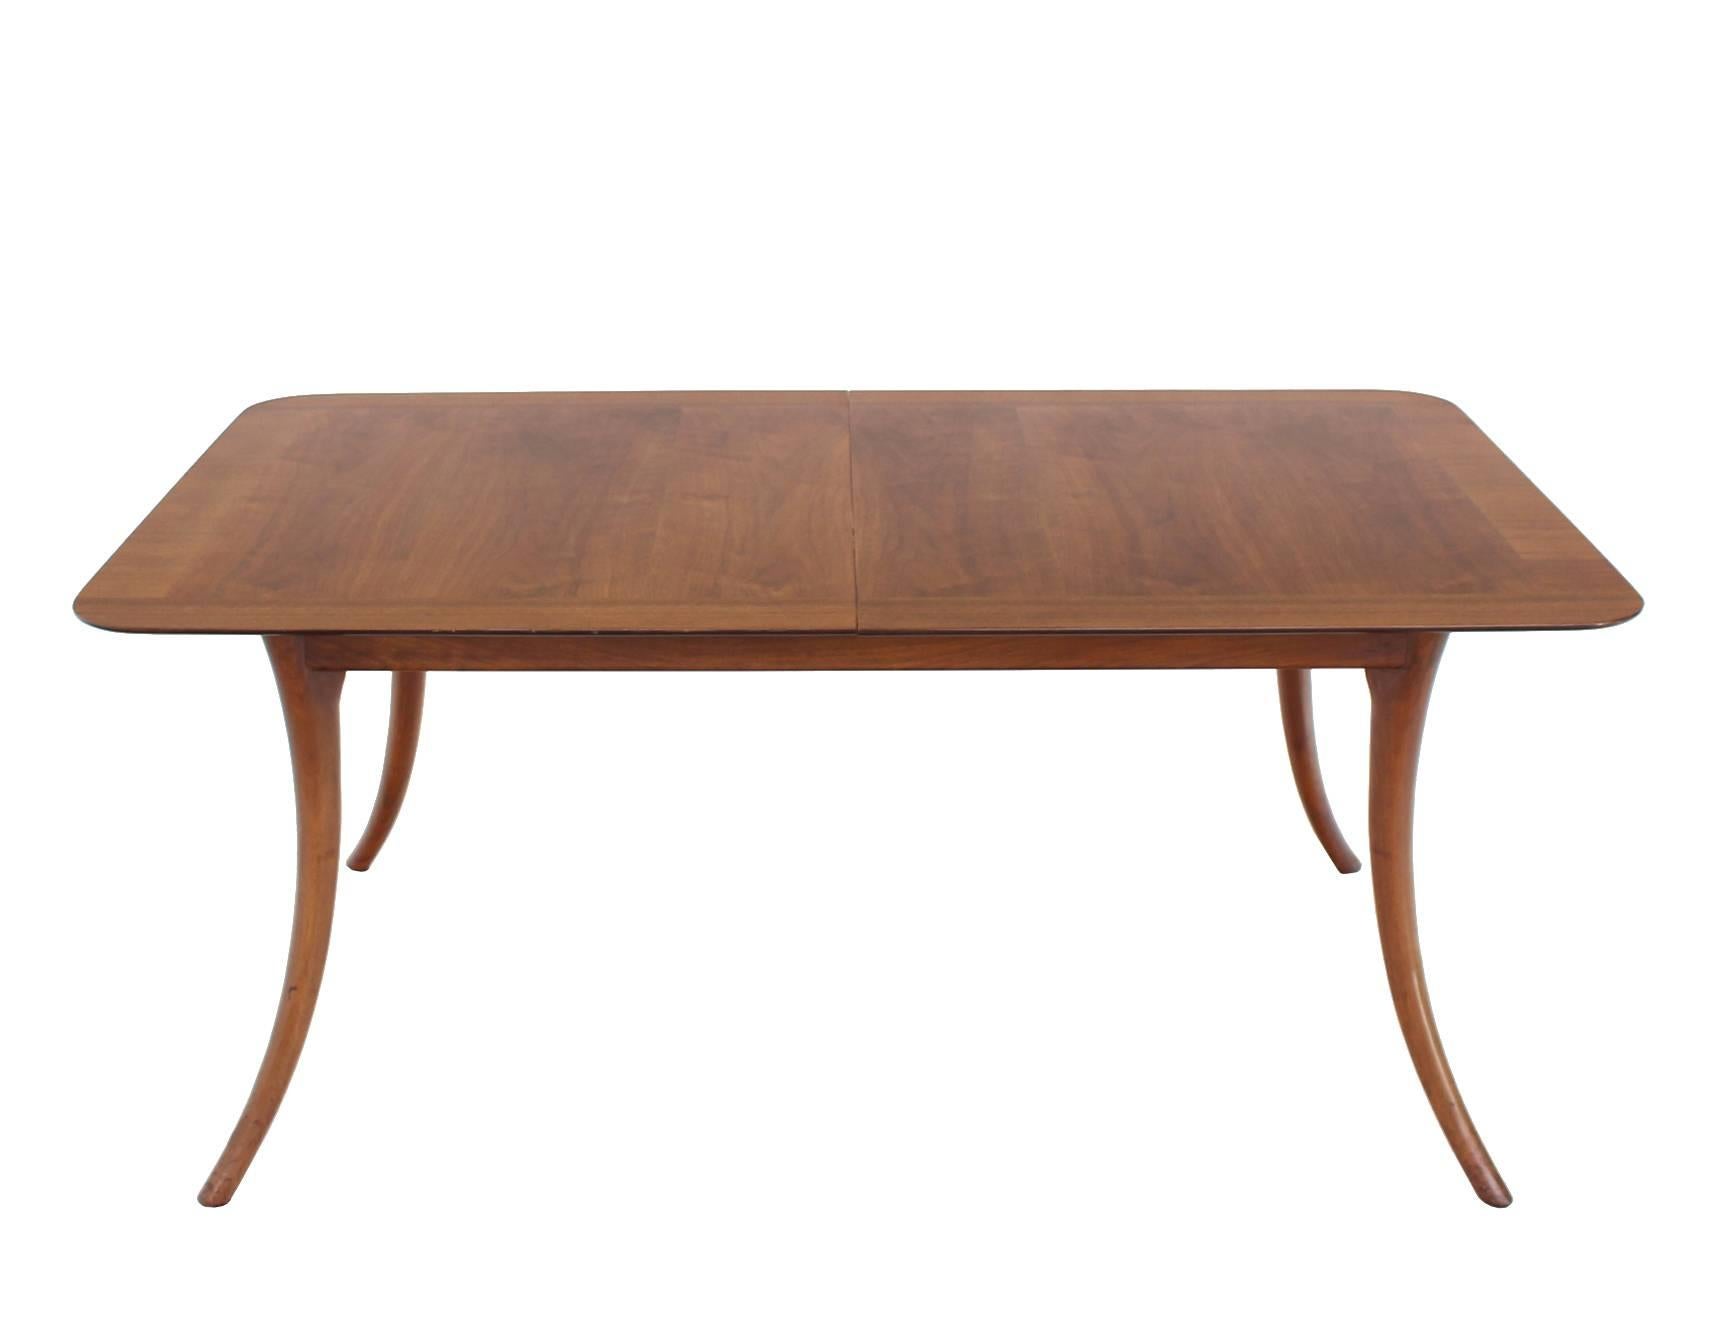 Very nice Mid-Century Modern walnut dining table designed by Robsjohn Gibbings for Widdicomb. The table is all in beautiful condition but does not come with the leaves.